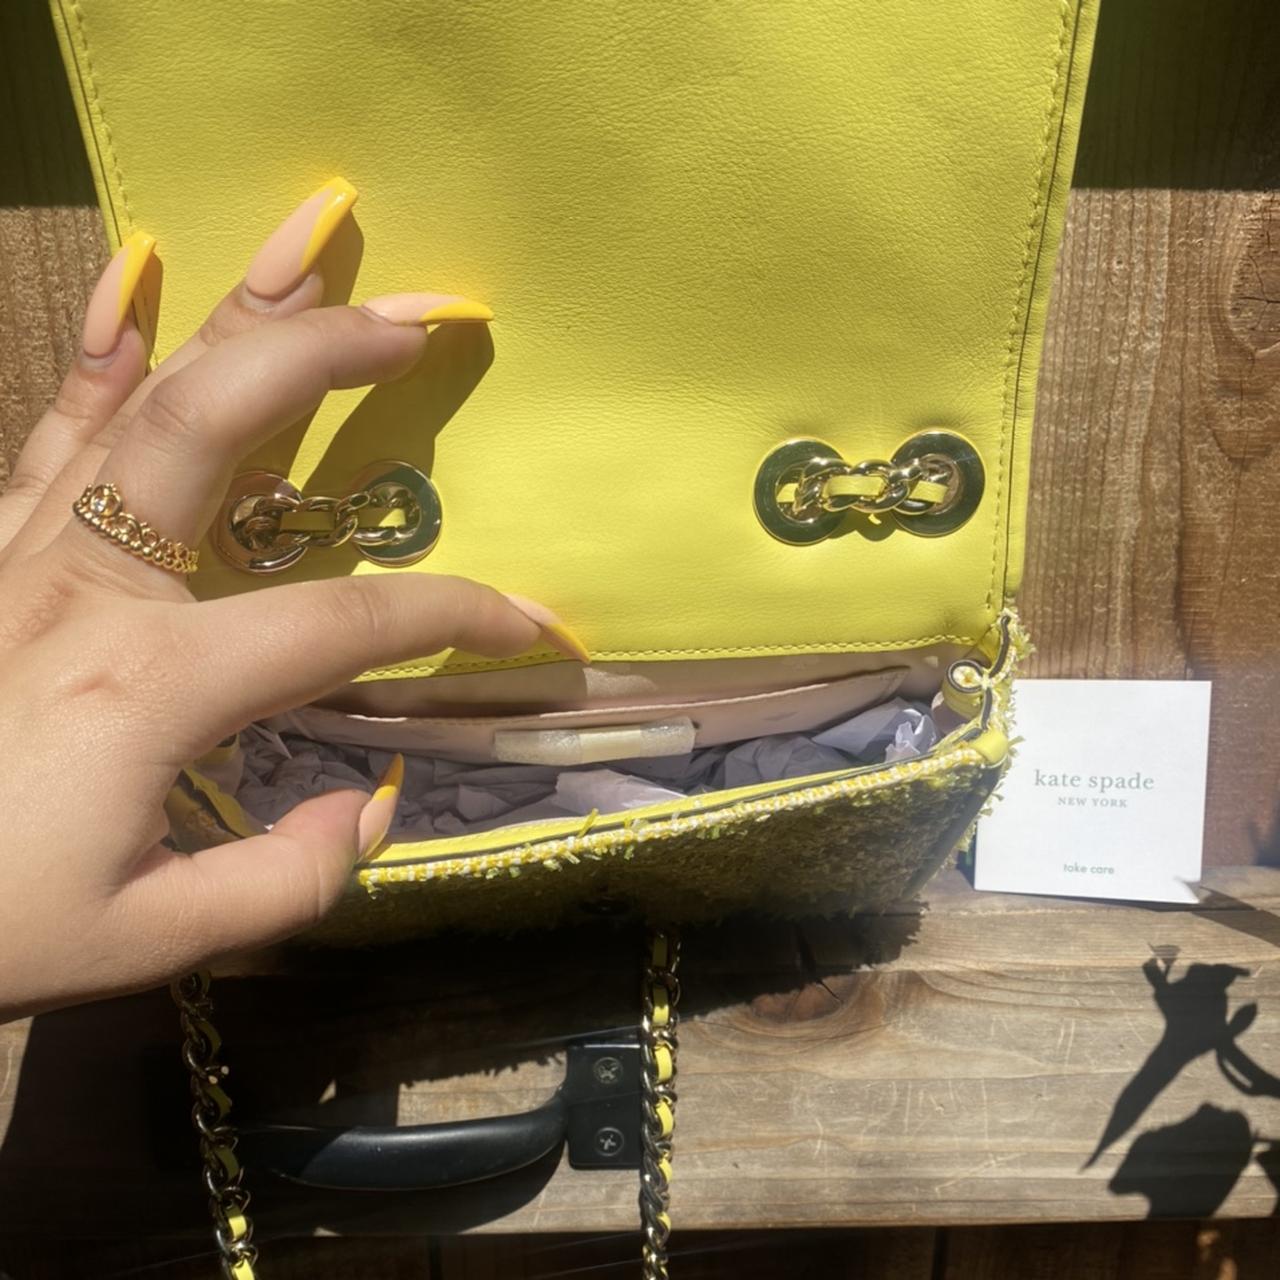 Kate spade yellow crossbody. Leather. Some scratches - Depop